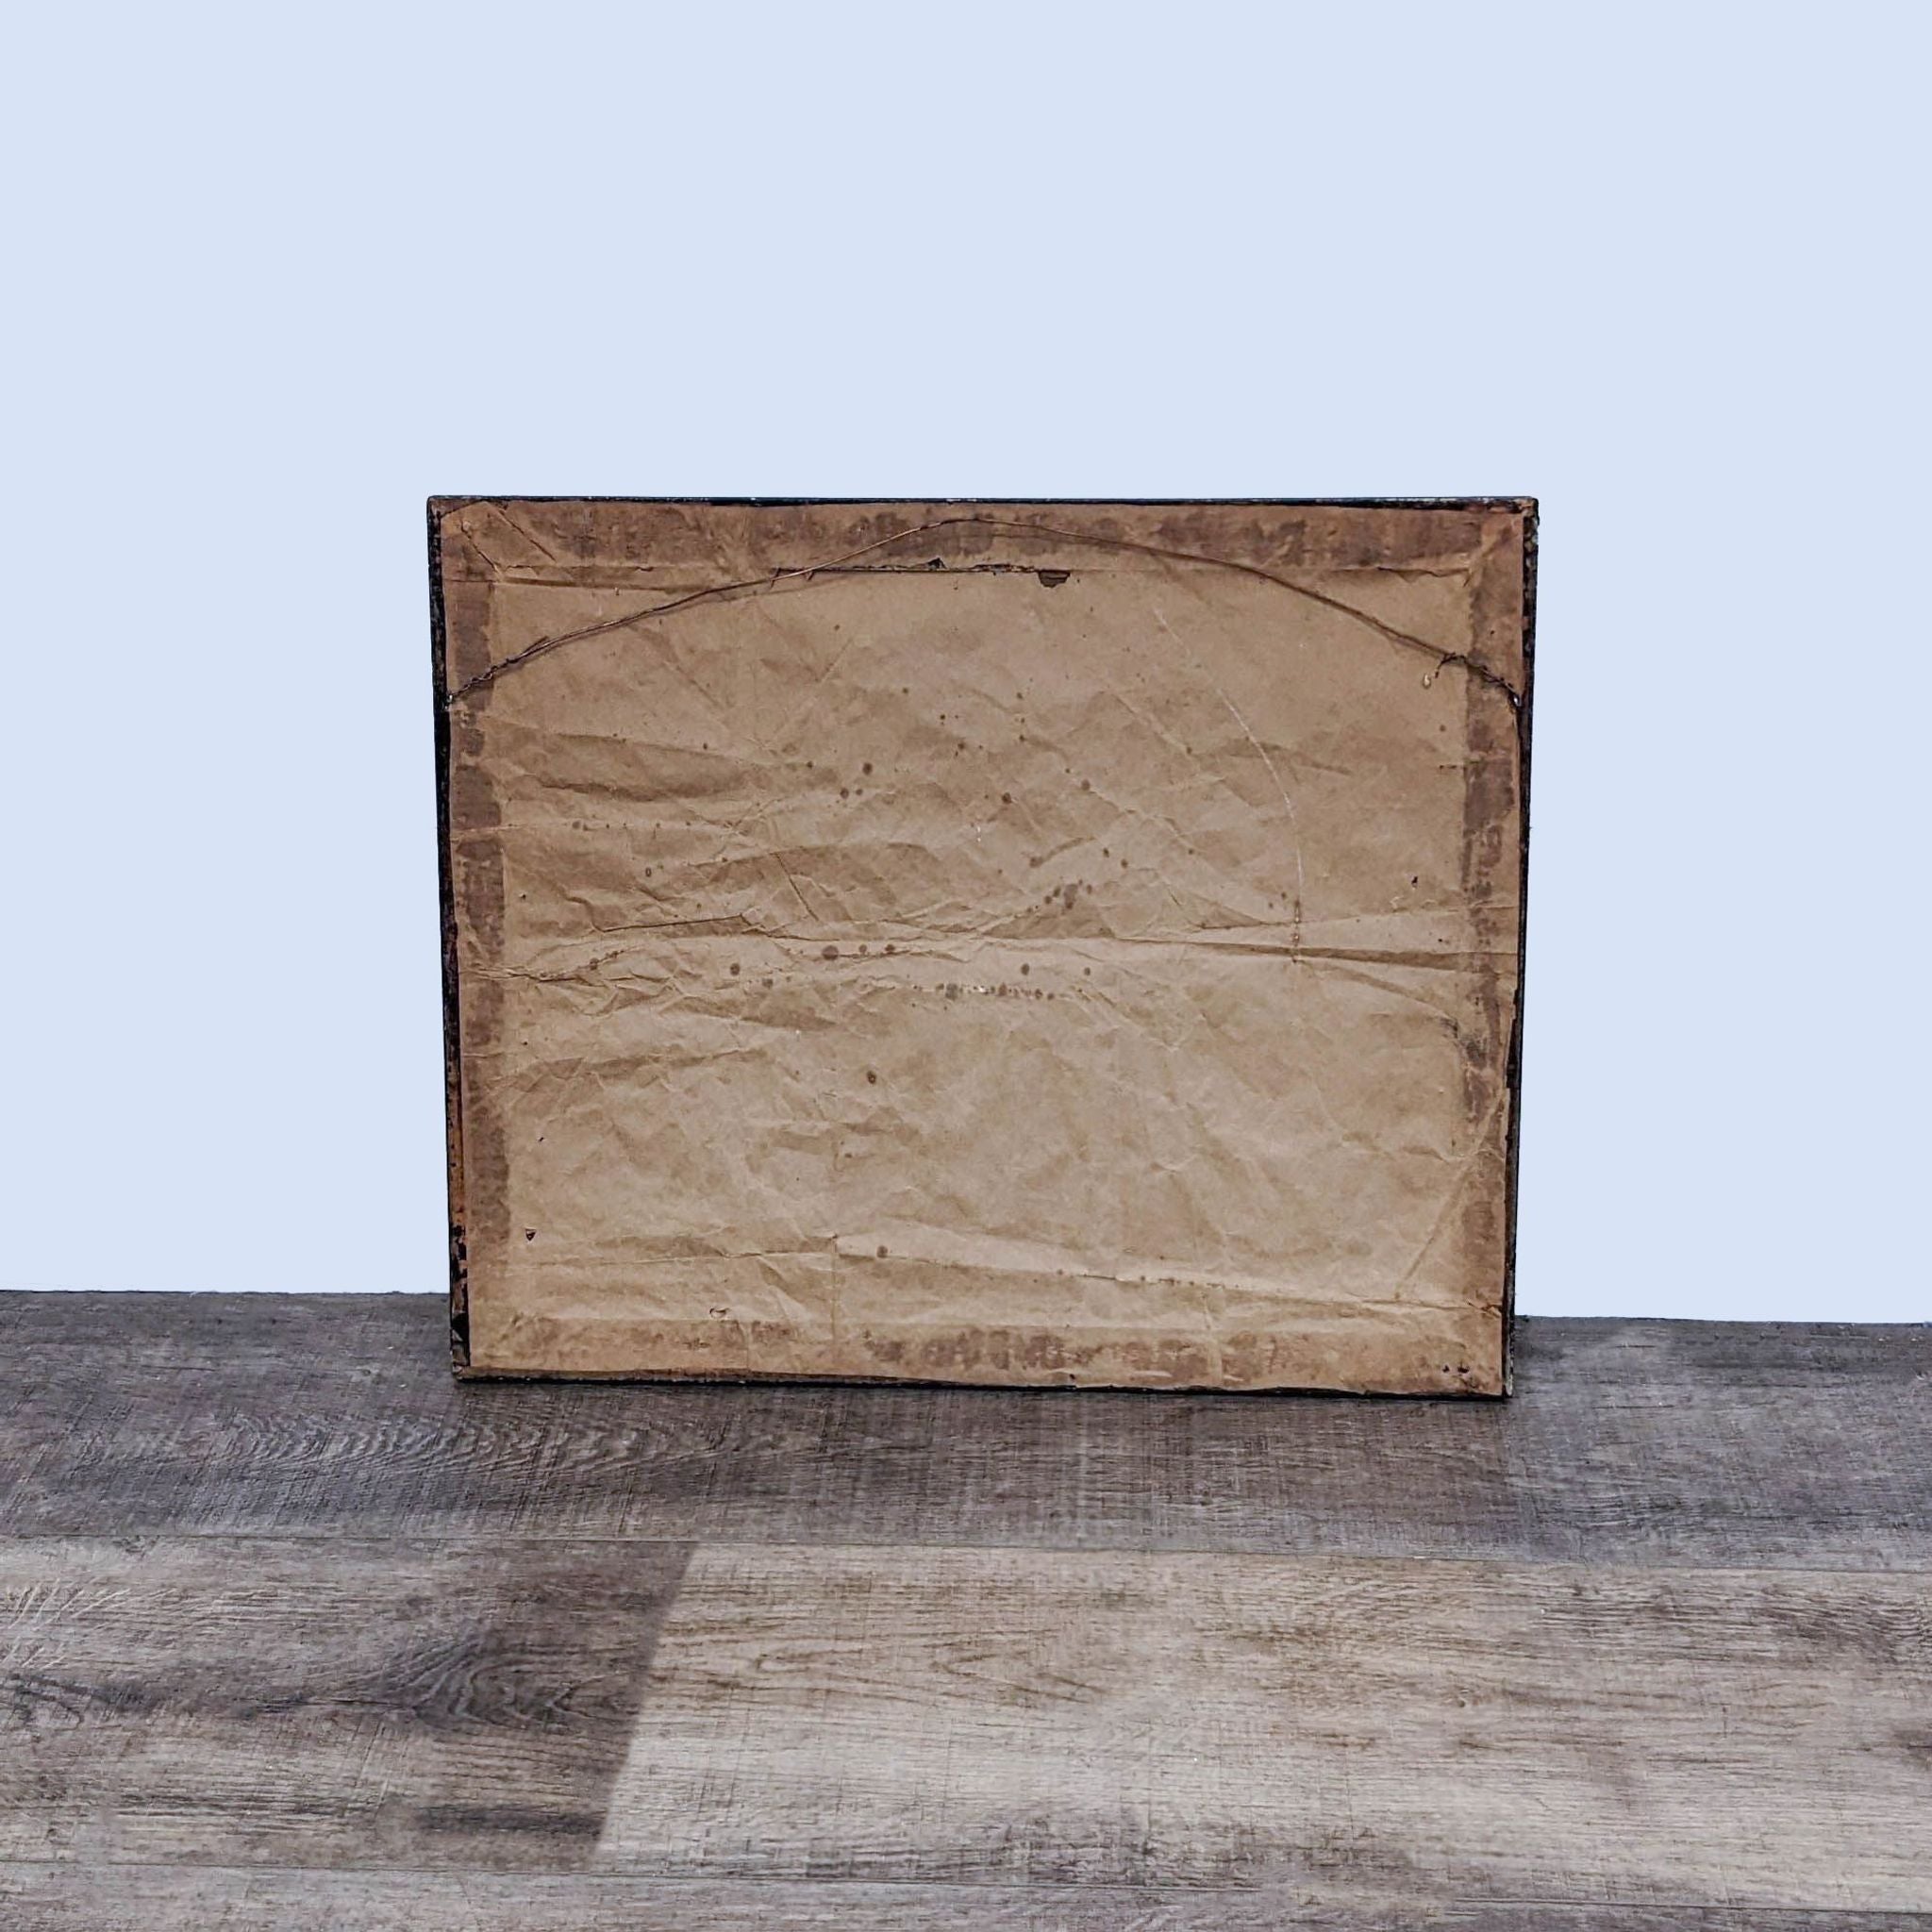 Back of a framed canvas showing aged paper and wire hanging assembly on a wooden surface against a white background.